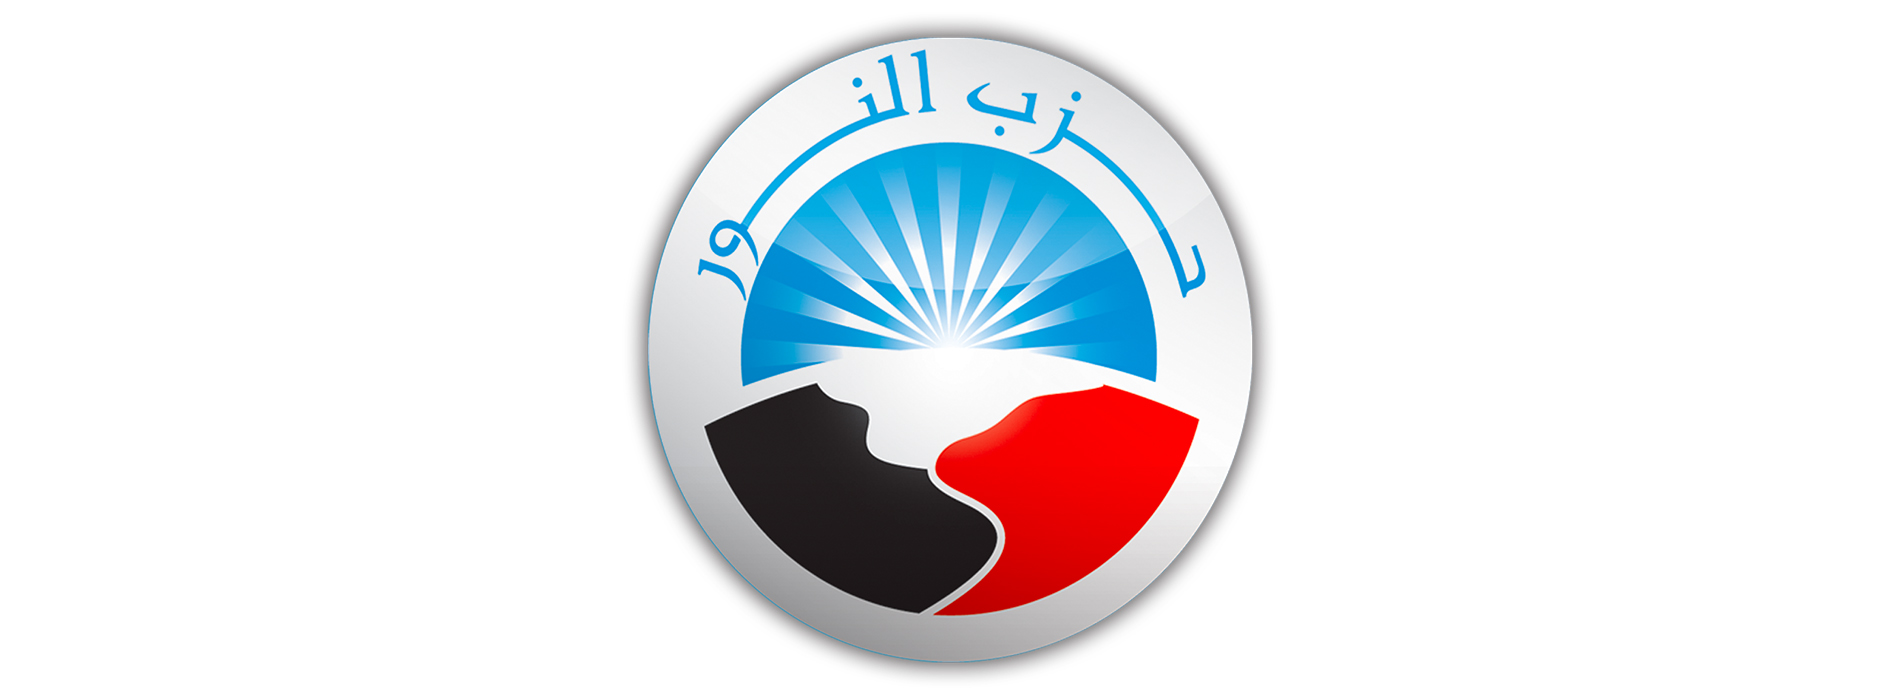 The Al-Nour Party - The Famous Muslim Party In Egypt